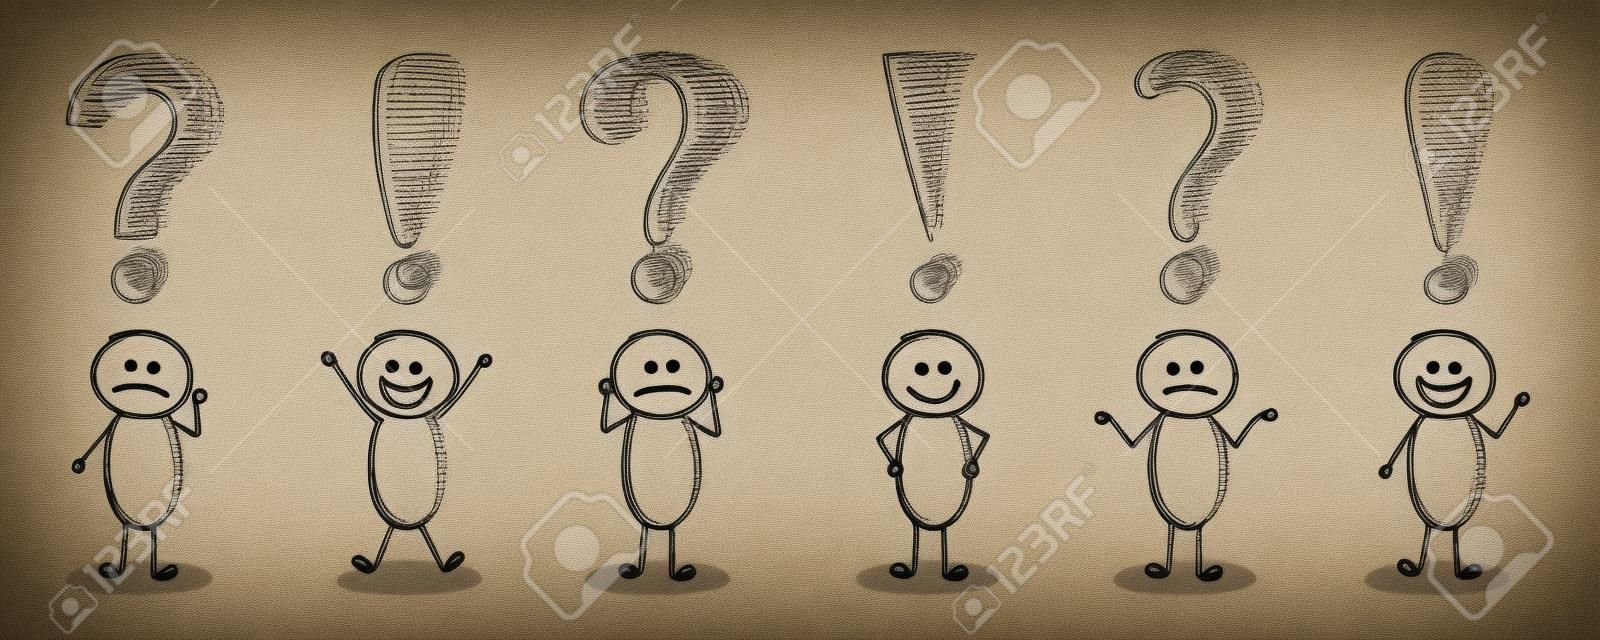 Funny stickmen with question mark and exclamation point icons - big set. Vector.